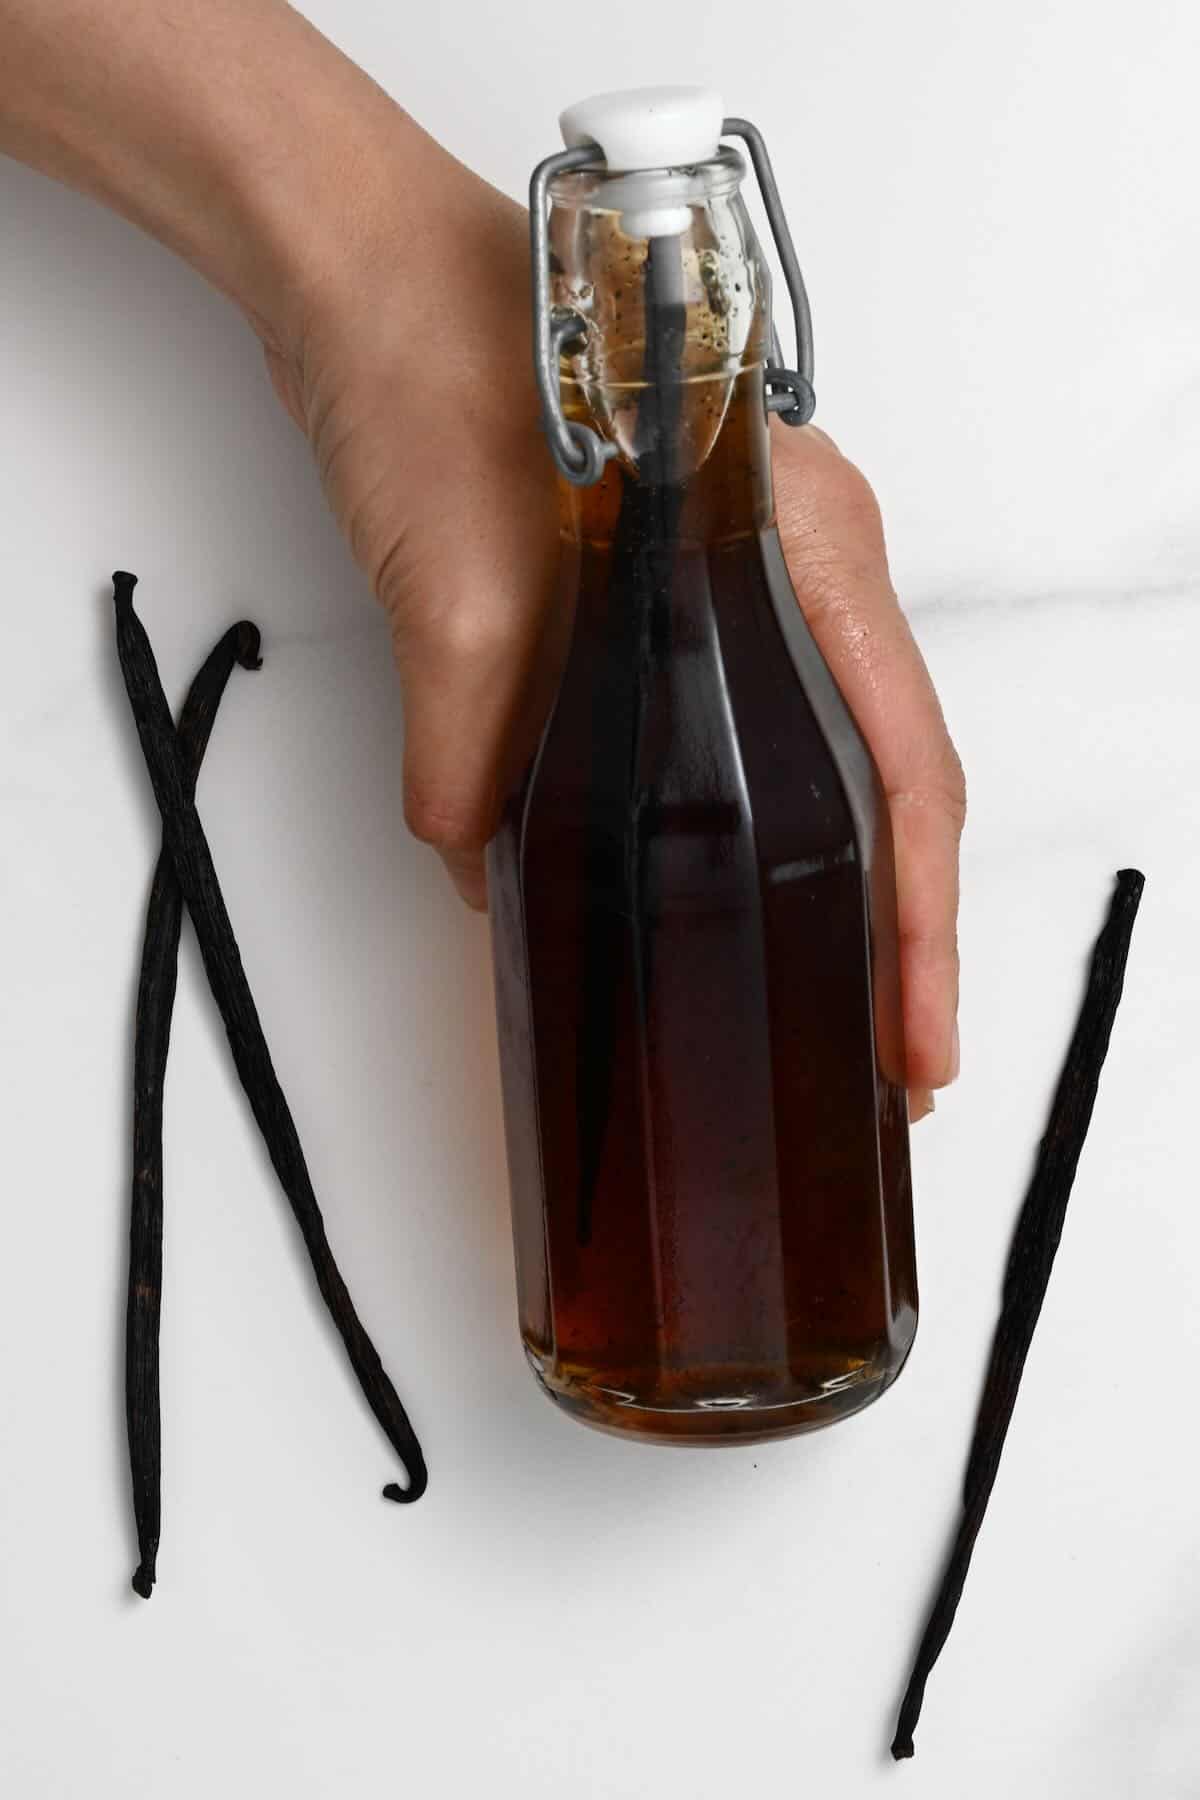 A bottle with homemade vanilla syrup and three vanilla beans next to it